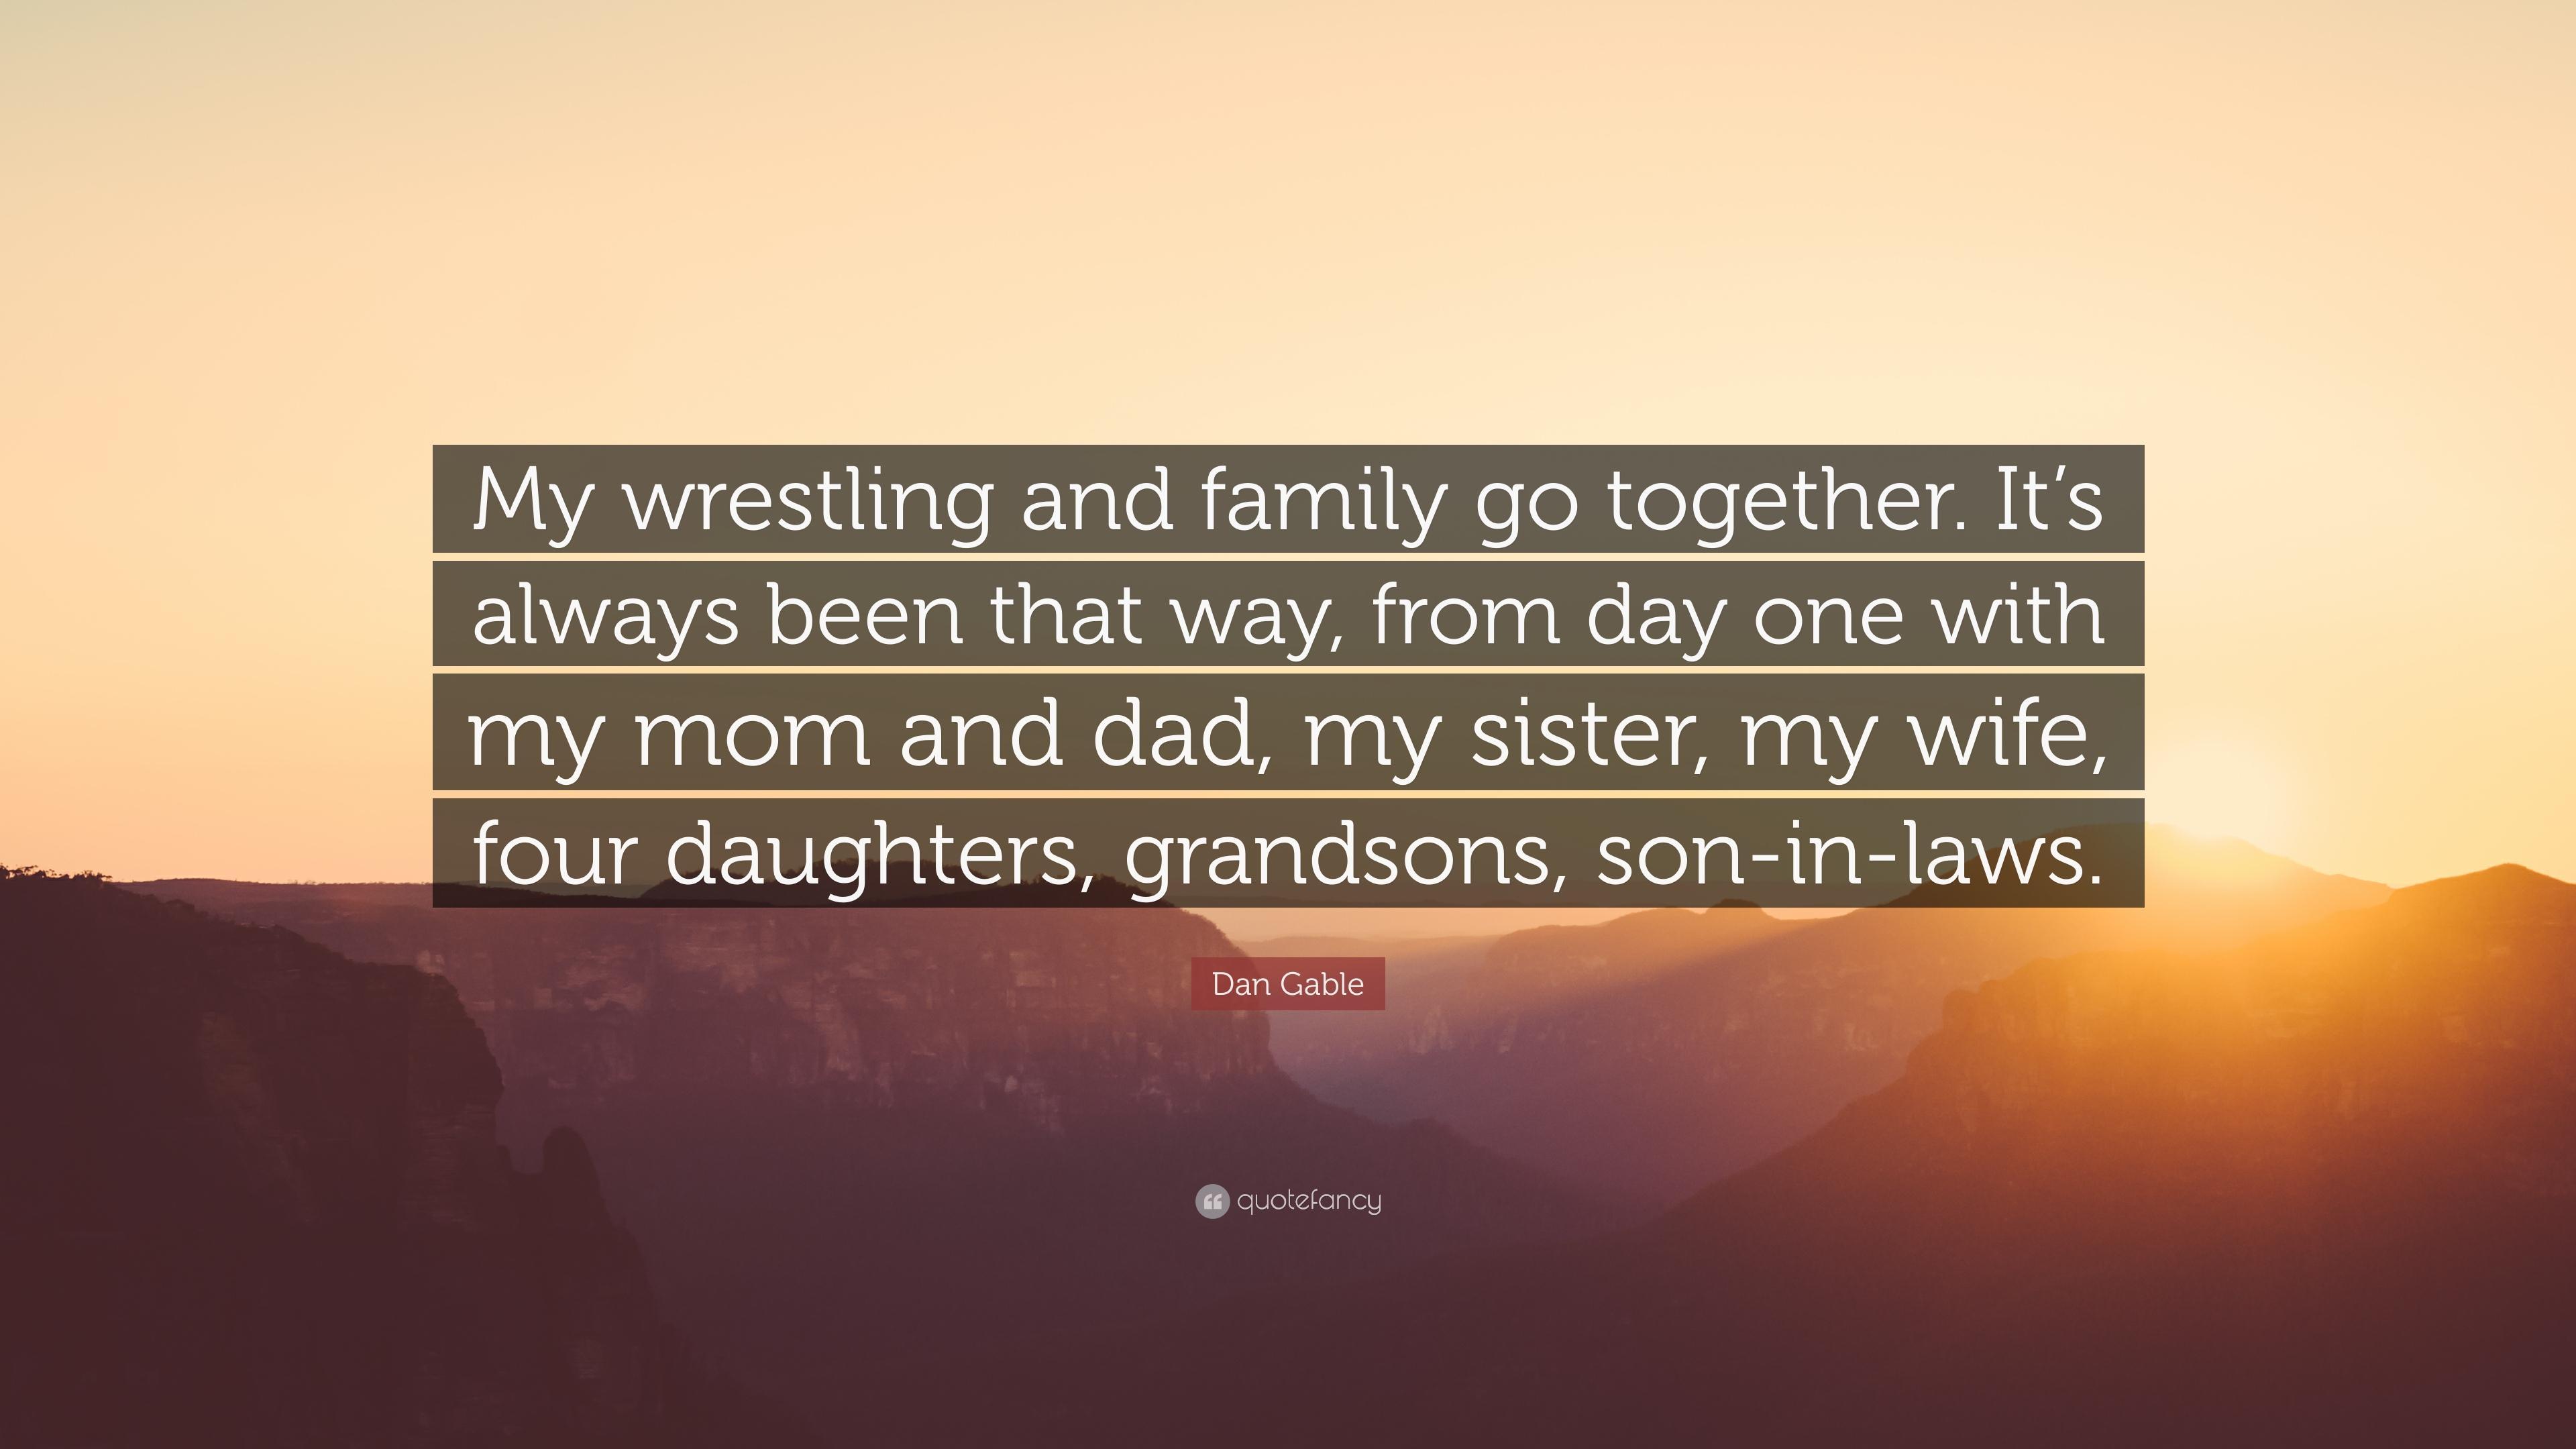 Wrestling Family Quotes and Dan Gable Quotes Wallpaper